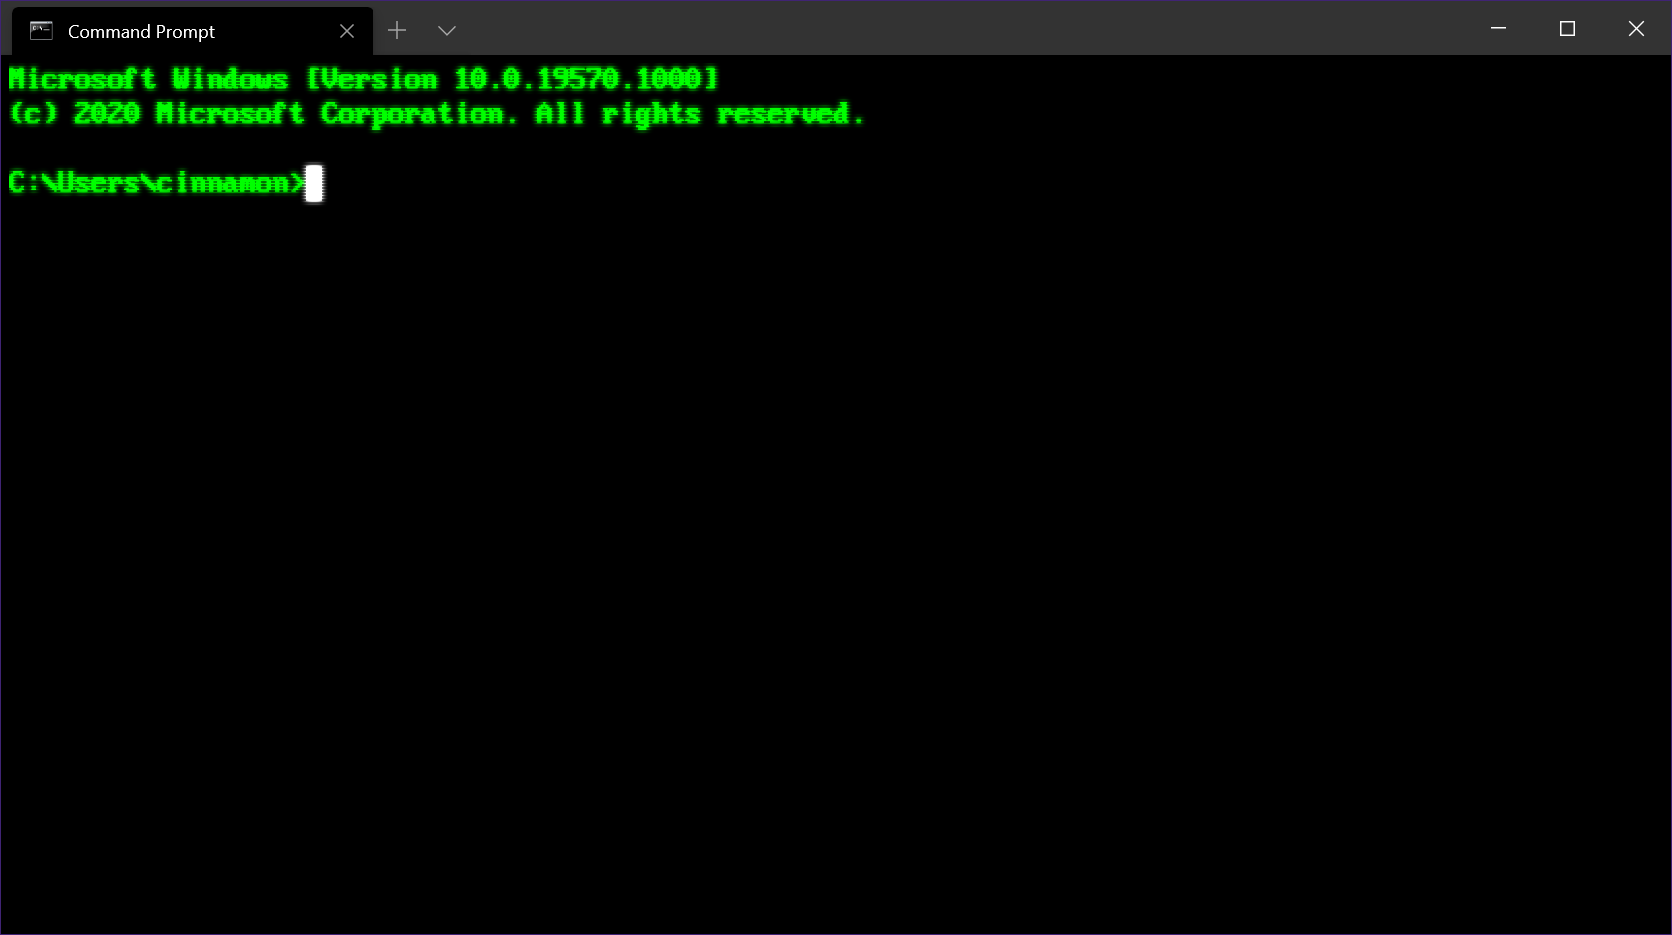 Terminal window with the cat command prompt.